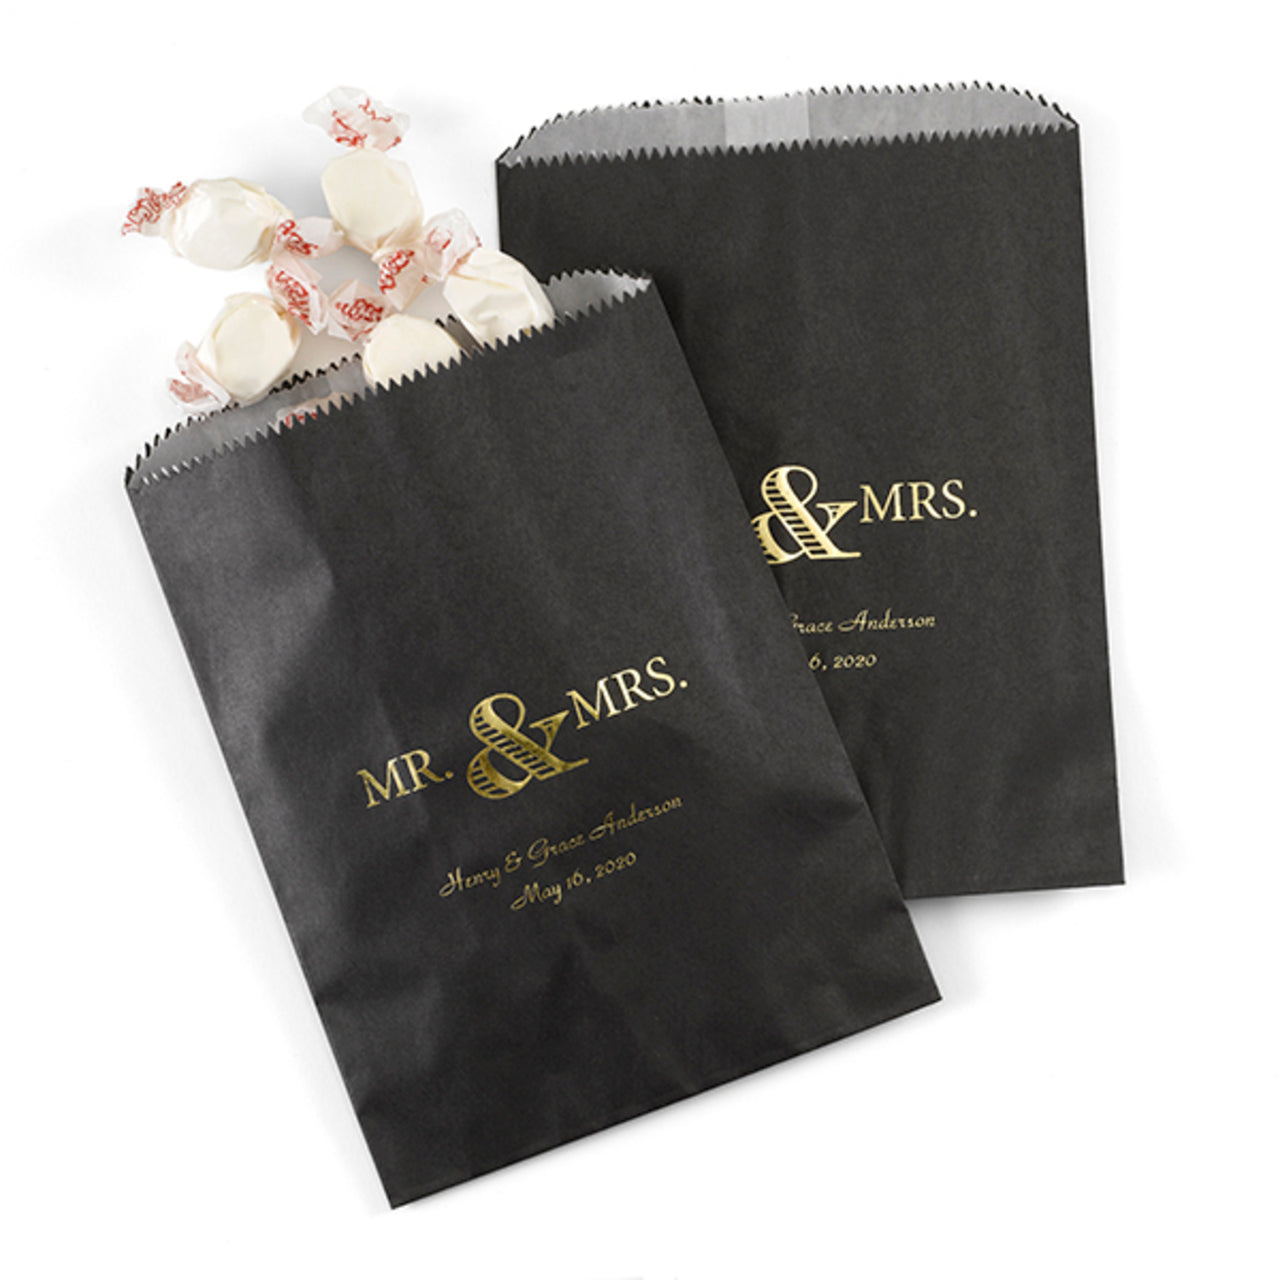 Personalized Mr. & Mrs. Treat Bags (Available in Multiple Colors